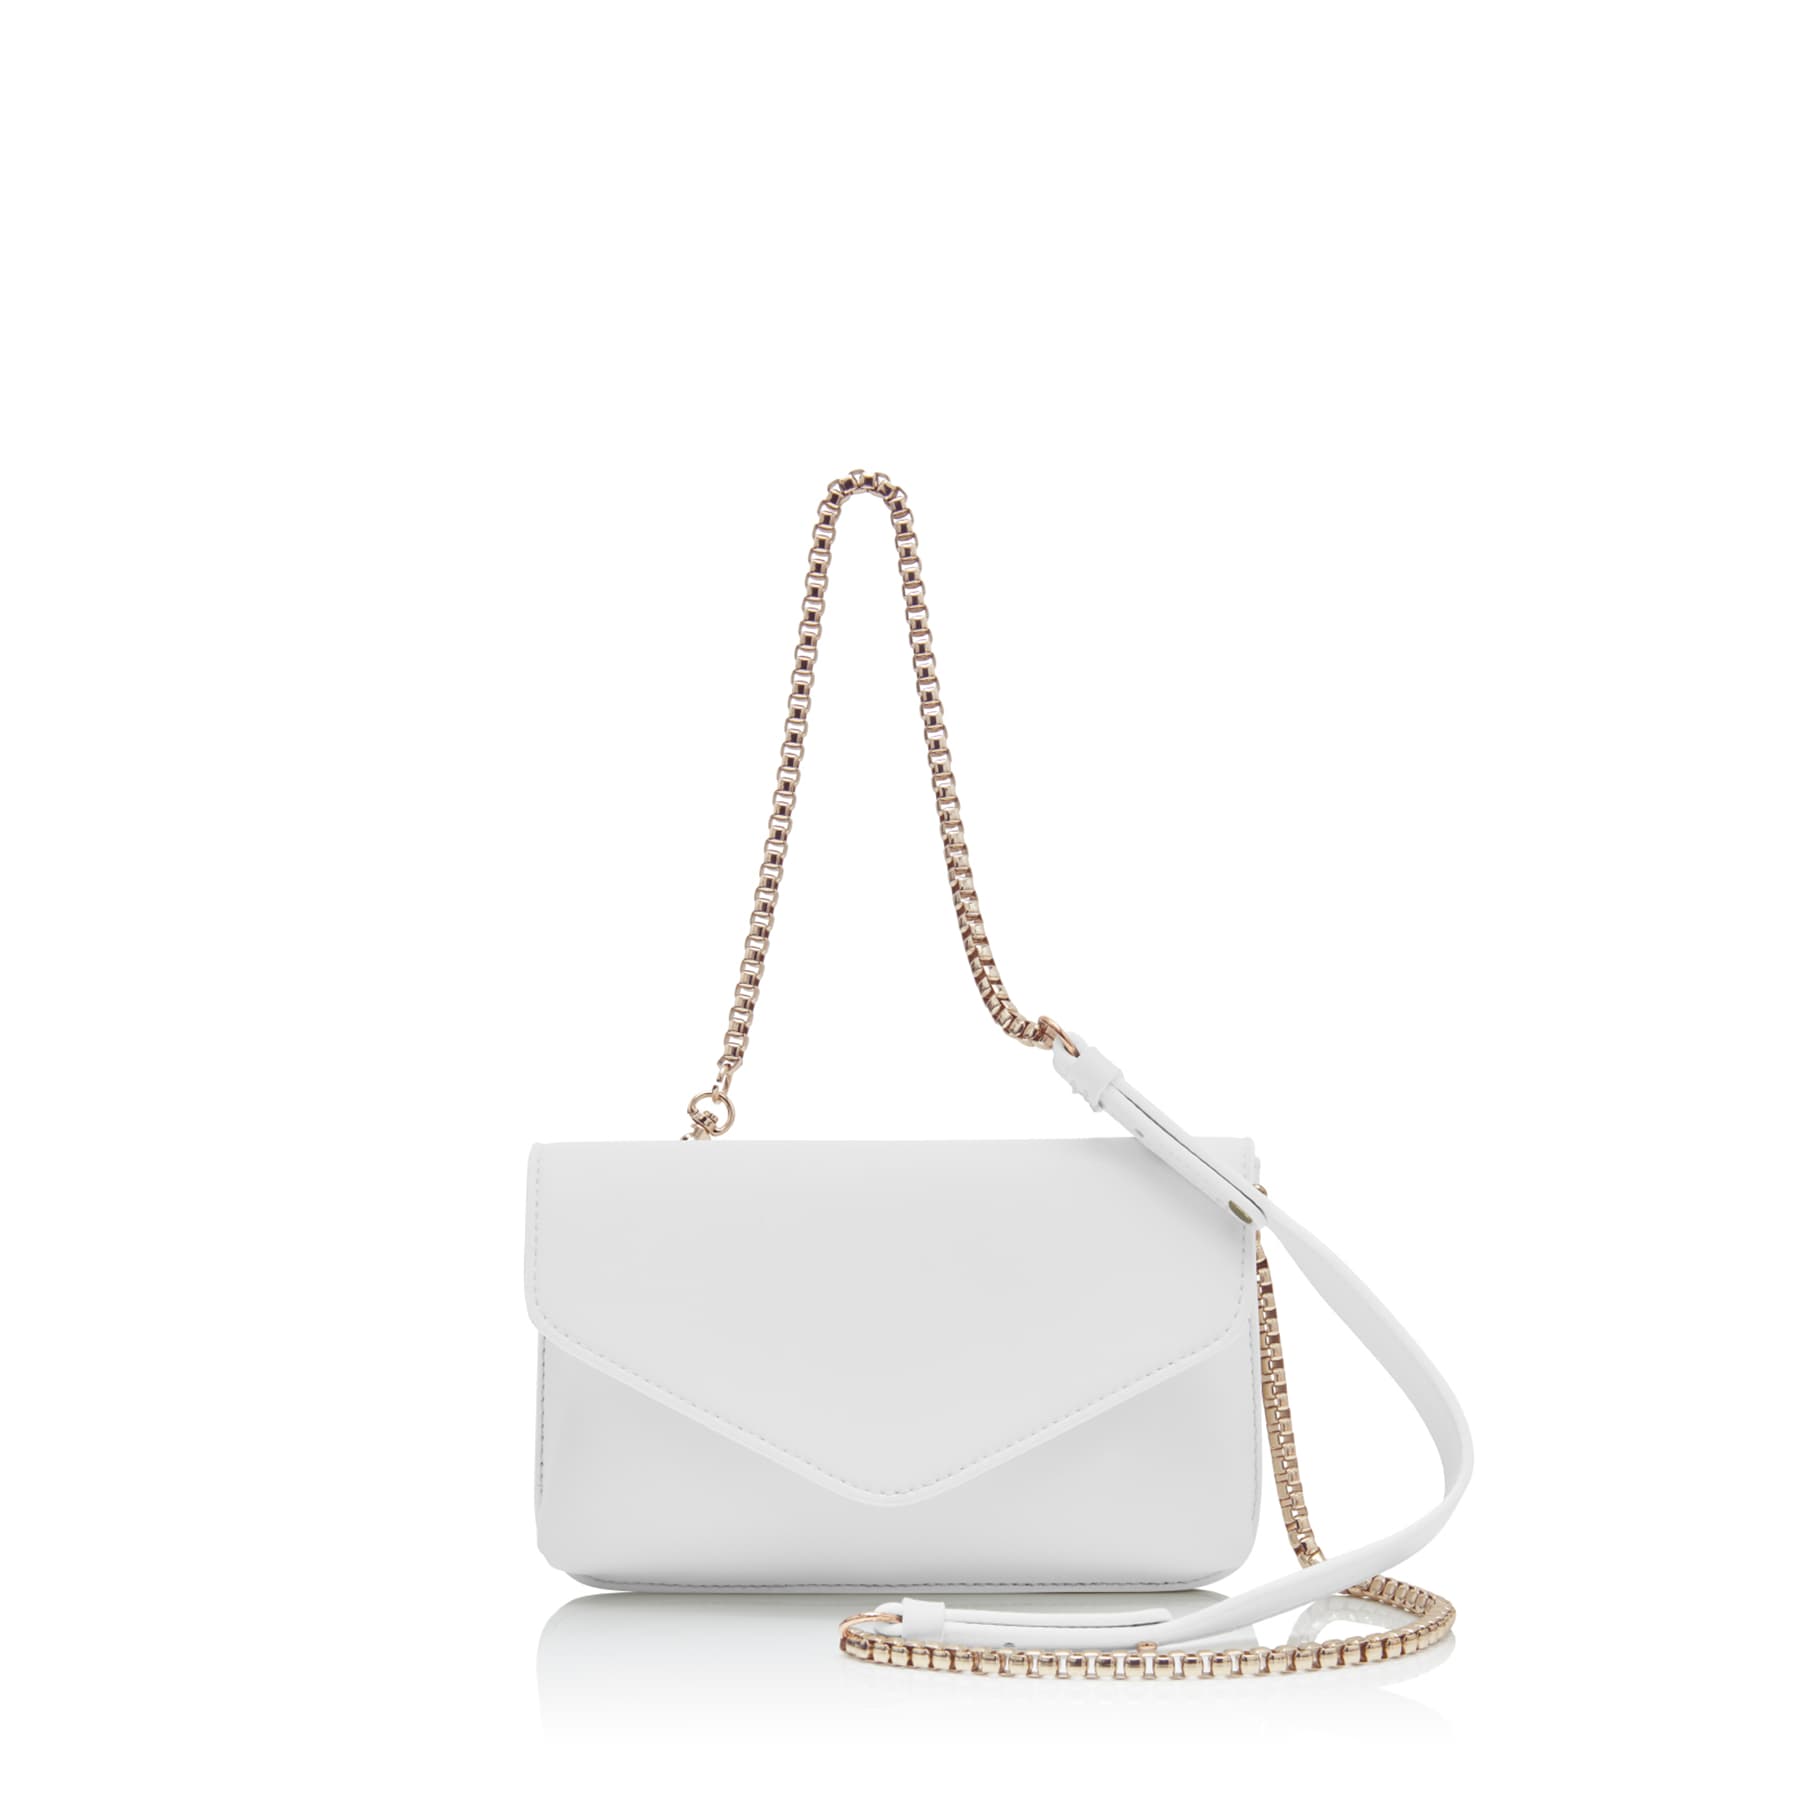 Julian Daisy White cross body bag with Gold chain made from environmentally conscious material Kayla Fabric